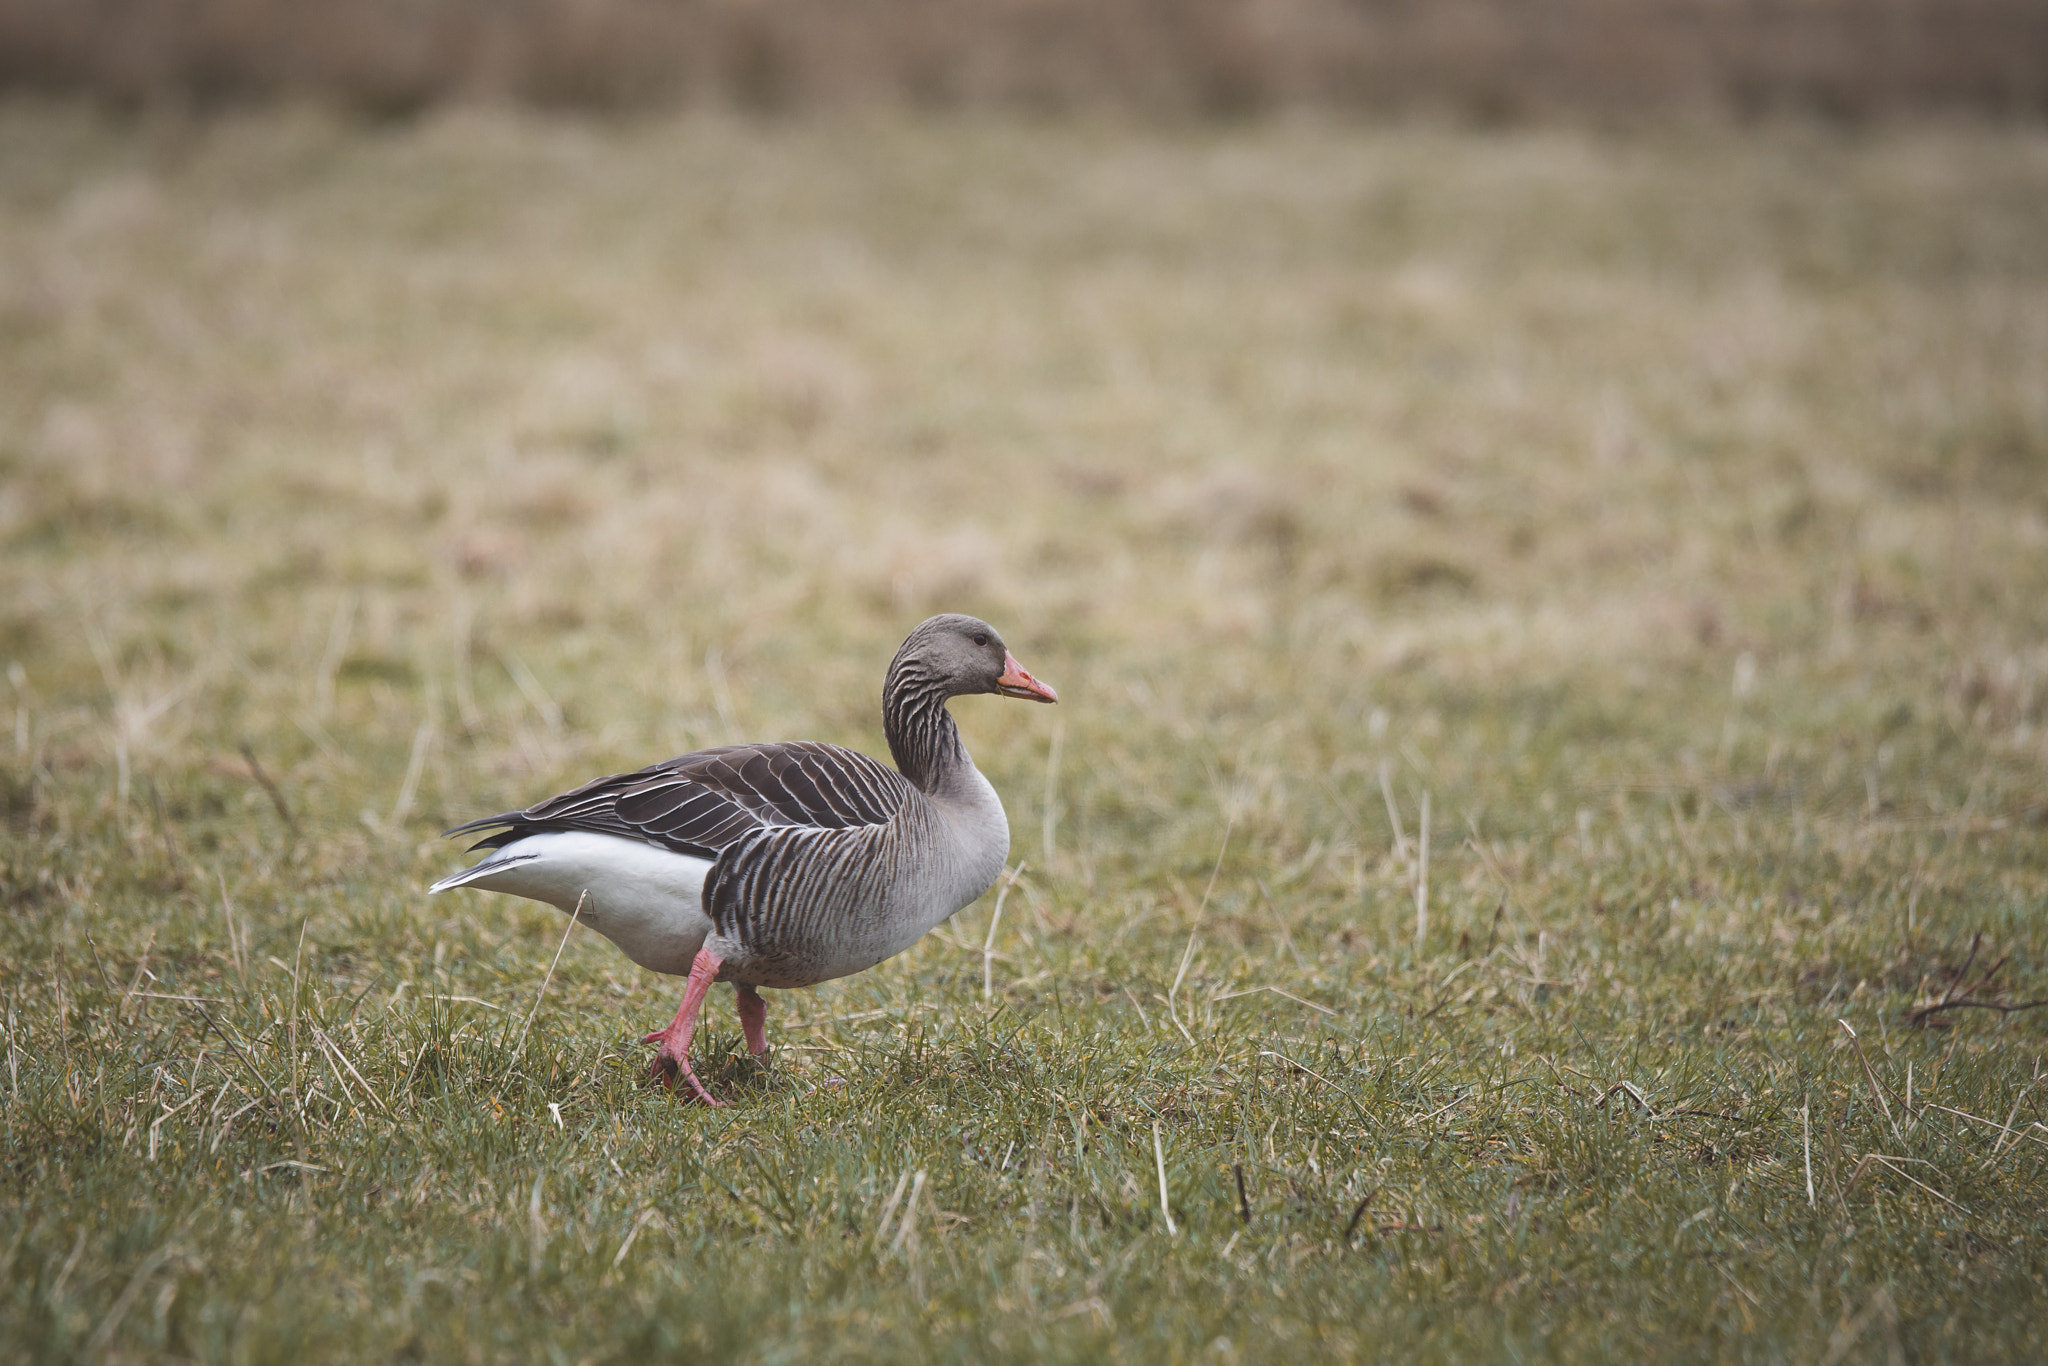 Sony a99 II sample photo. Grey goose walking on grass photography